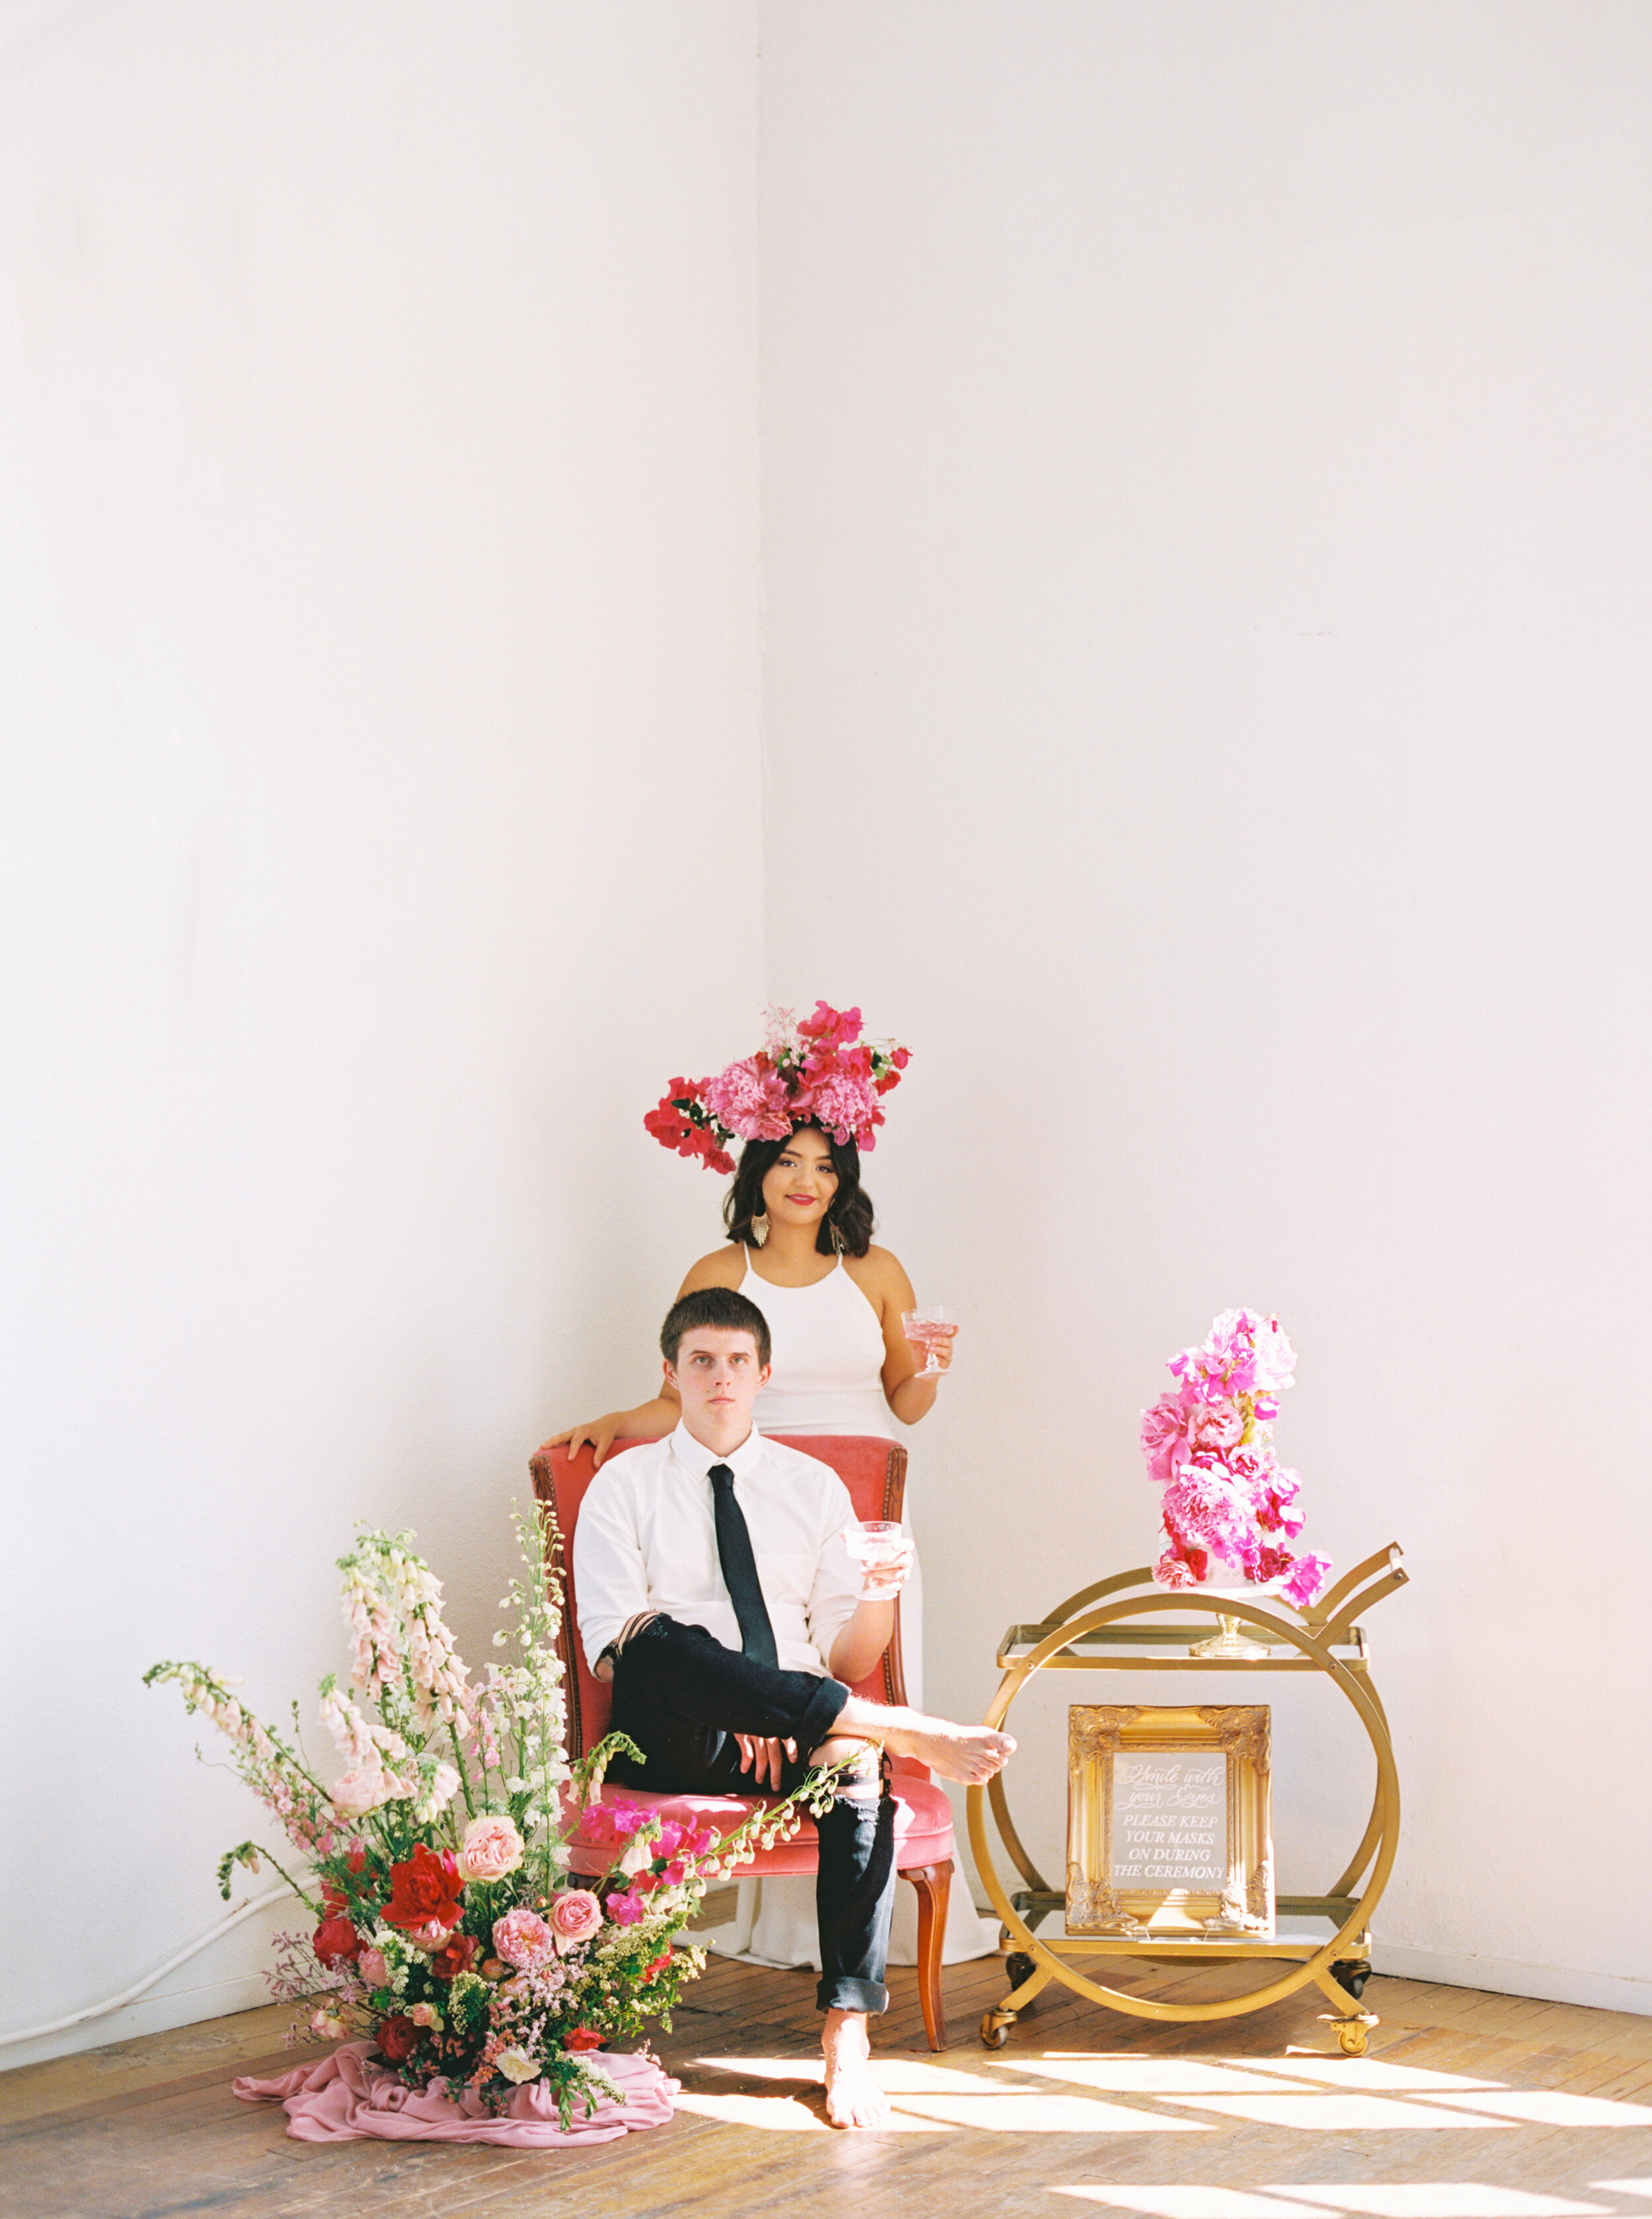 A Romantic Wedding Elopement Filled with Colorful Fuchsia - Sarahi Hadden Submission-68.jpg